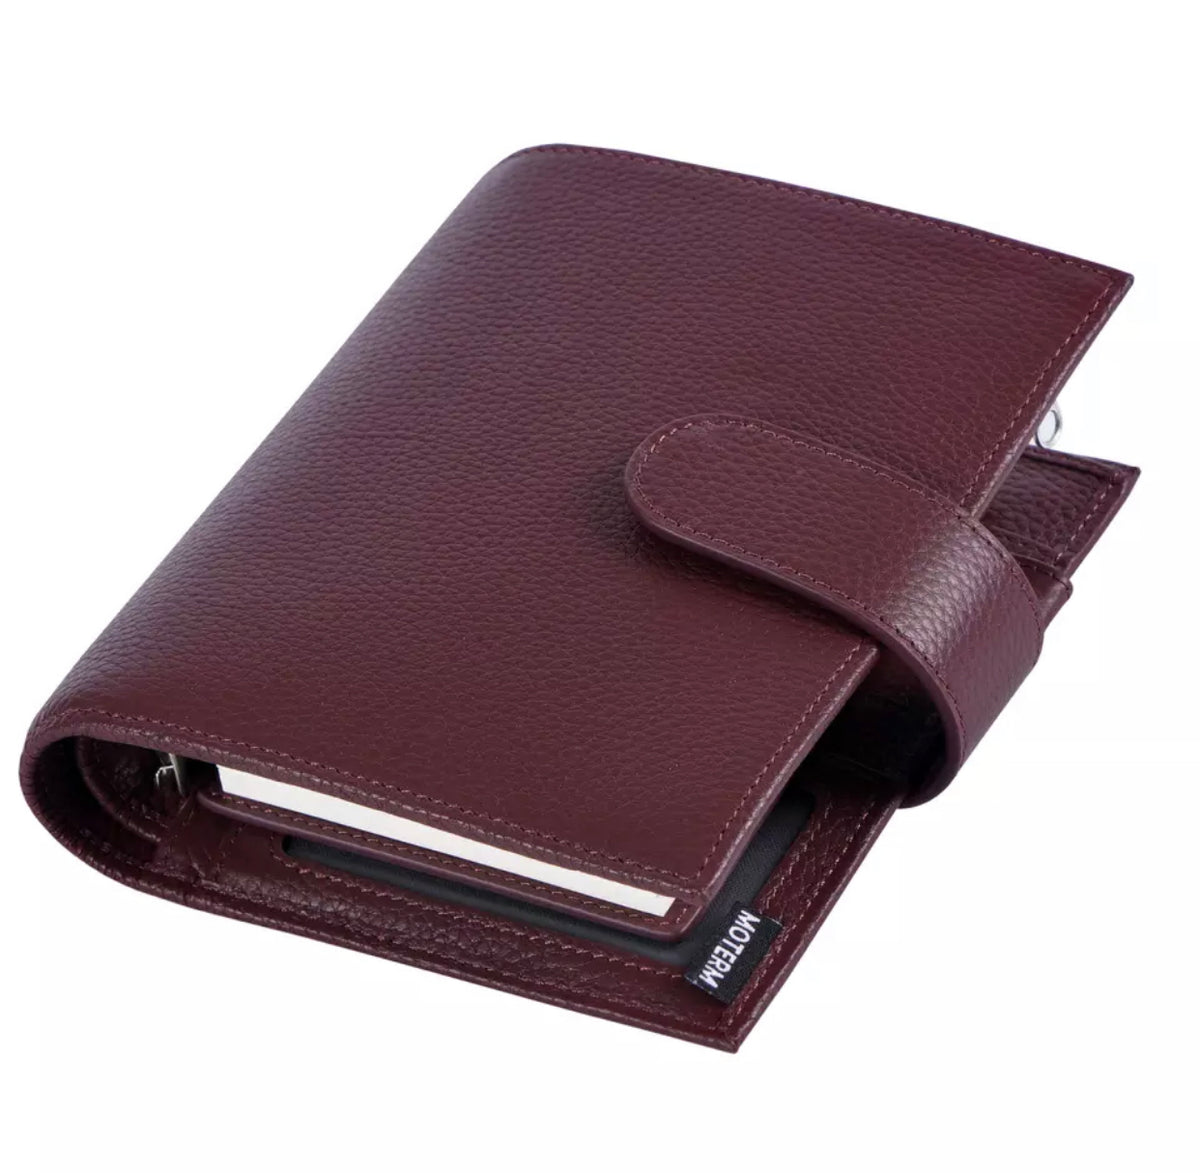 A7 Moterm Full Grain Vegetable Leather Pocket size Luxe 2.0